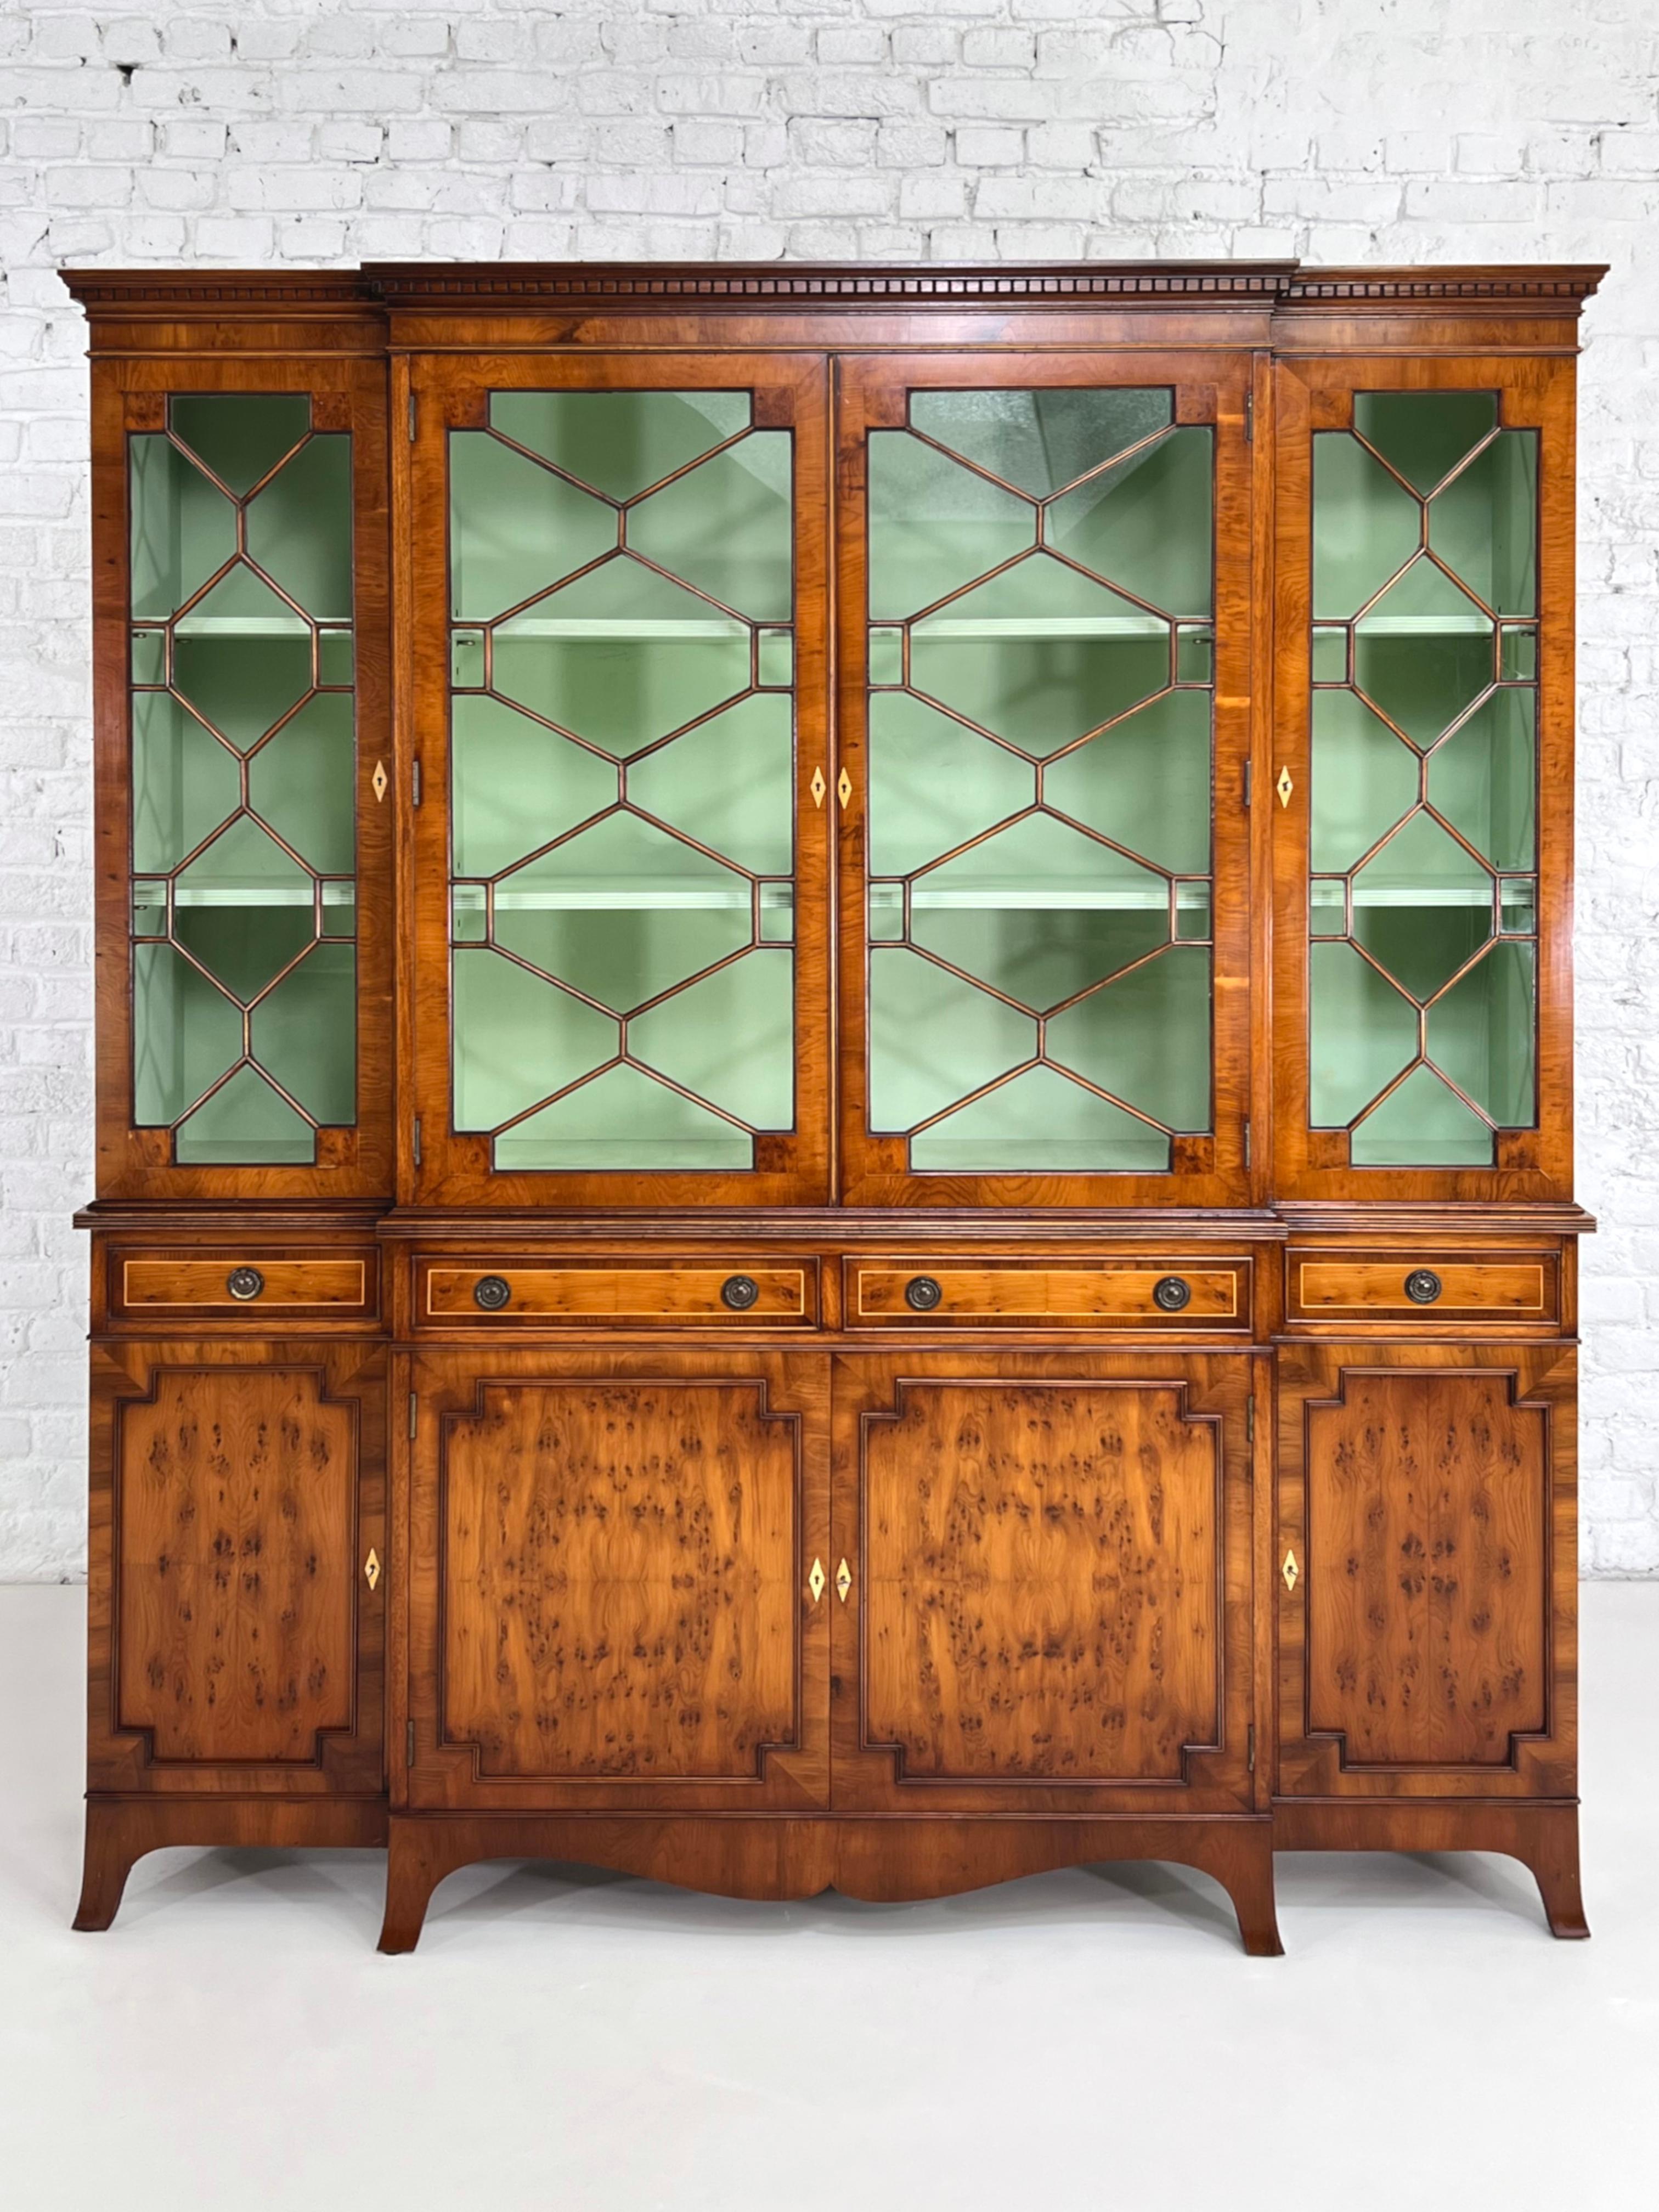 Antic Wooden And Glass Bookcase Storage And Vitrine Cabinet composed of 2 parts:

Up one with storage spaces, 4 graphic glass panel doors with sculpted finishes and almond green lacquered inside
Bottom one with closed spaces, 4 drawers with